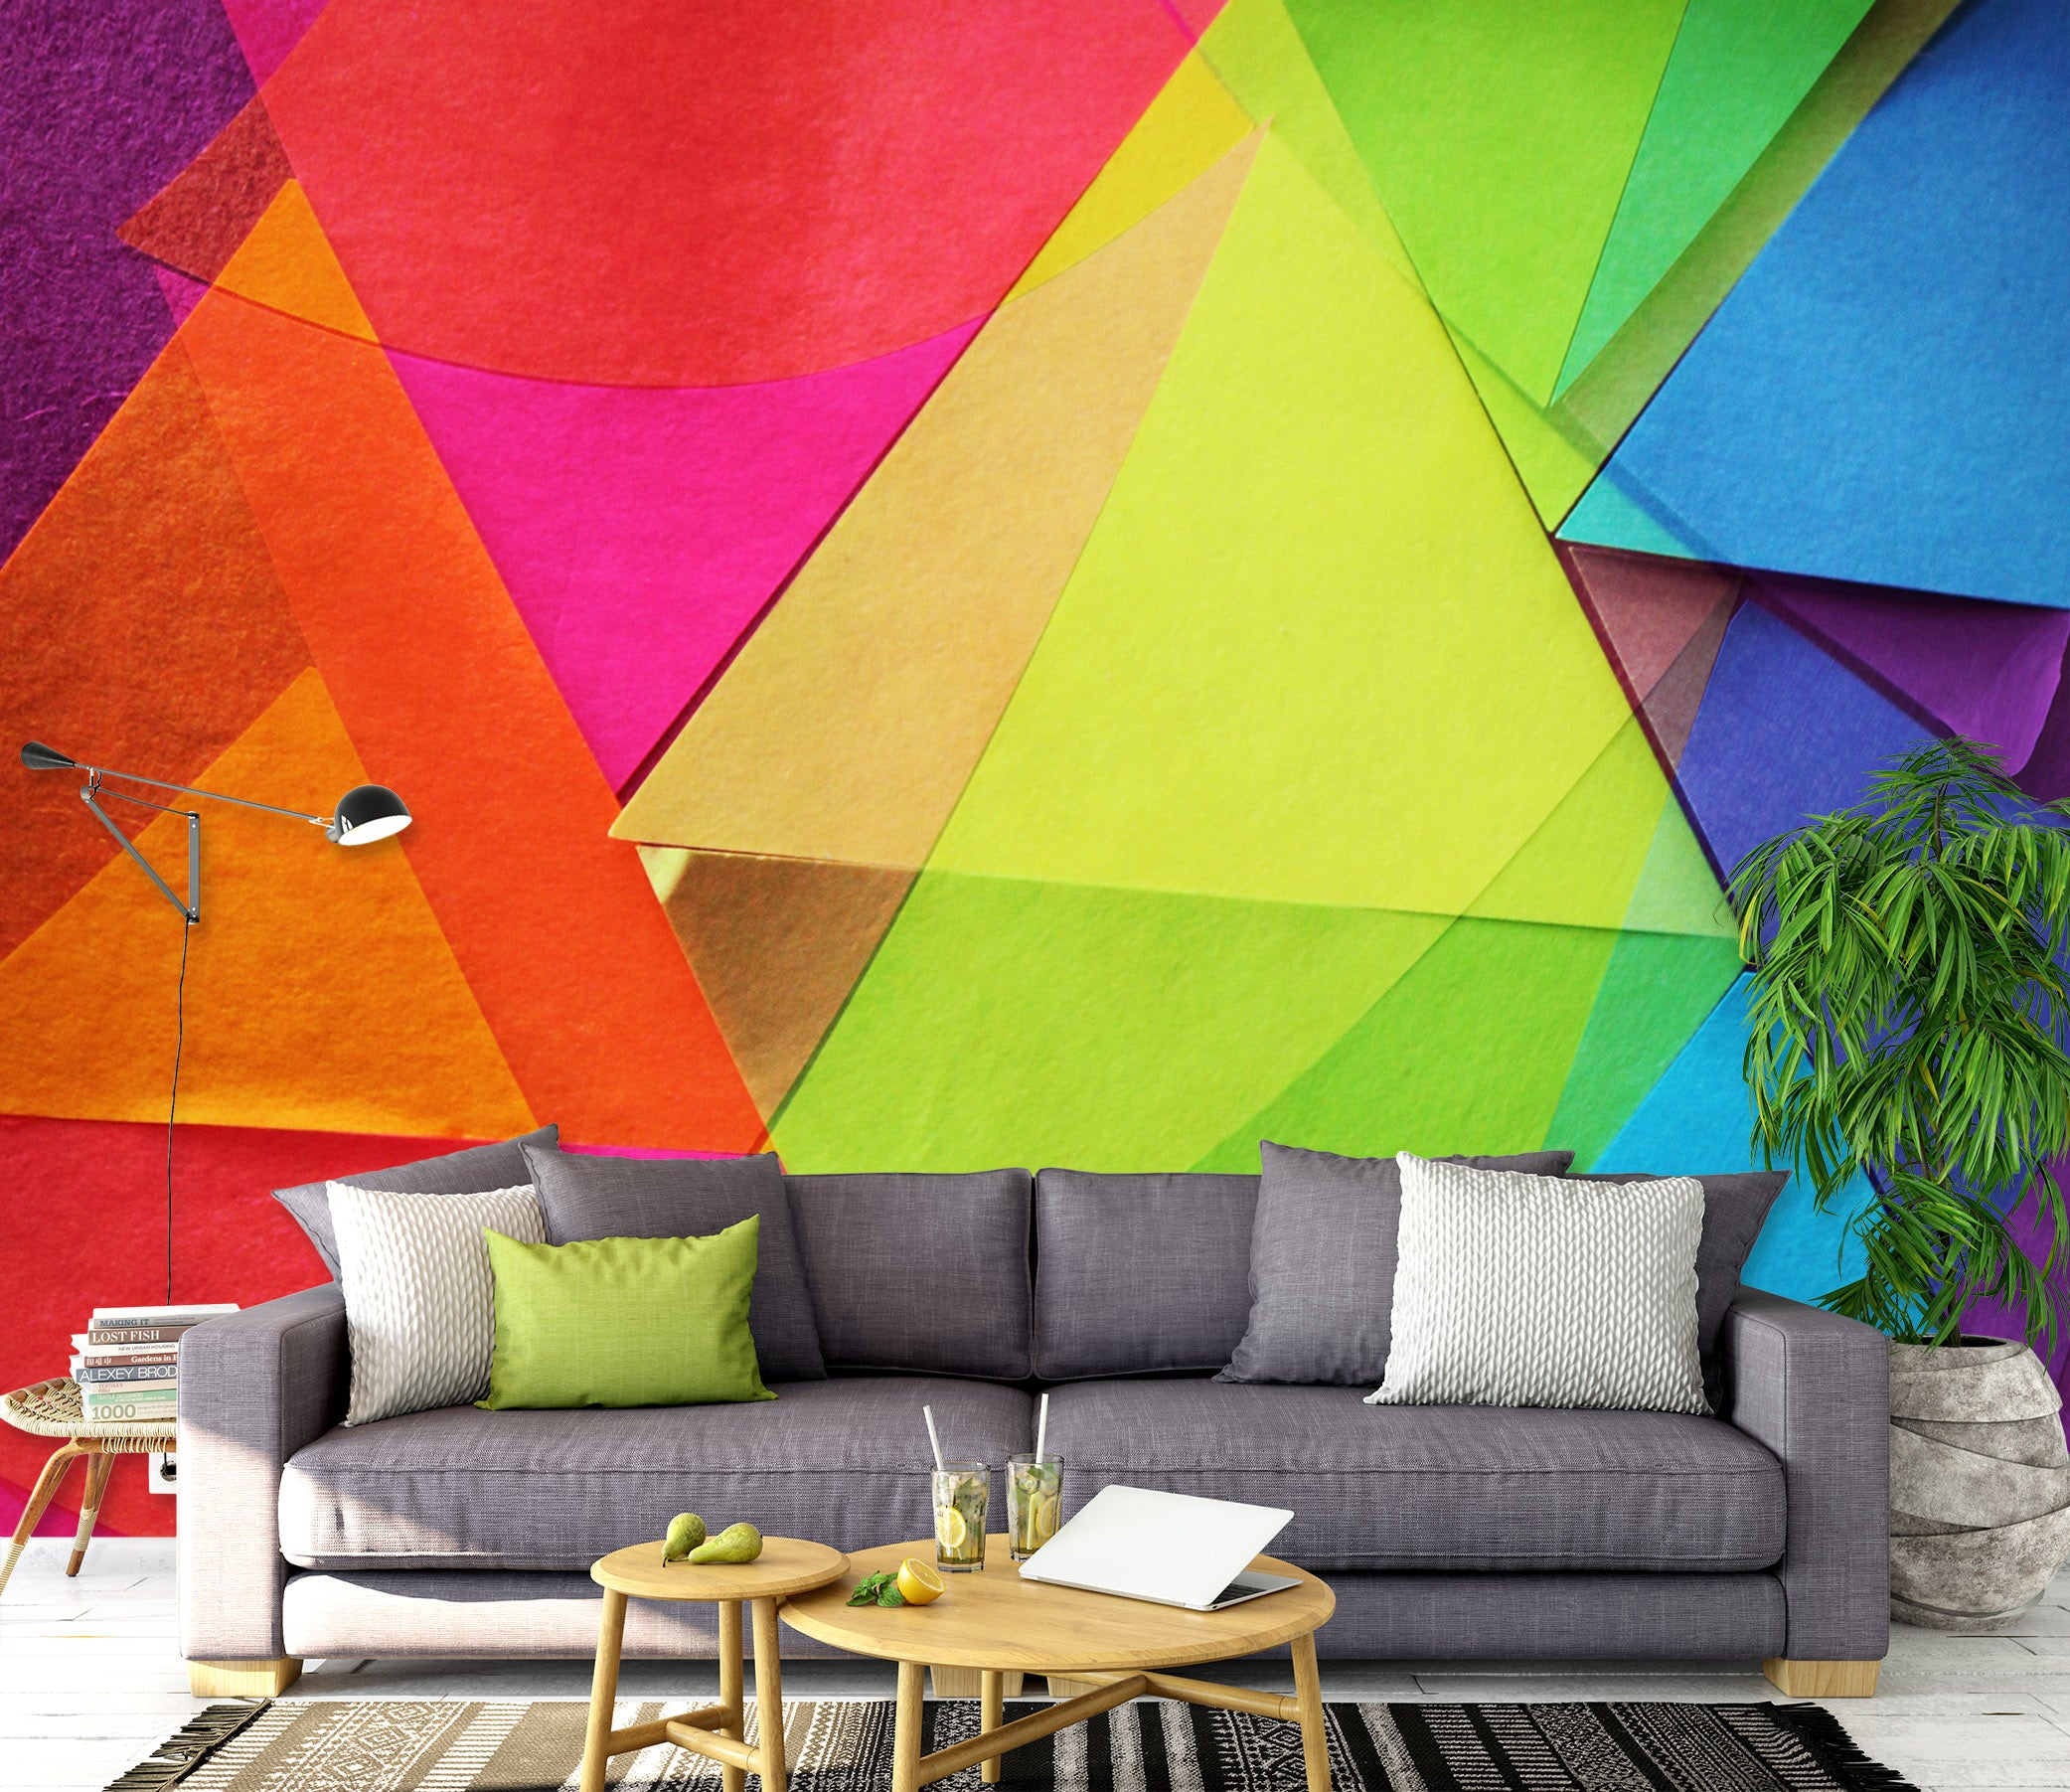 3D Colored Triangle 71089 Shandra Smith Wall Mural Wall Murals